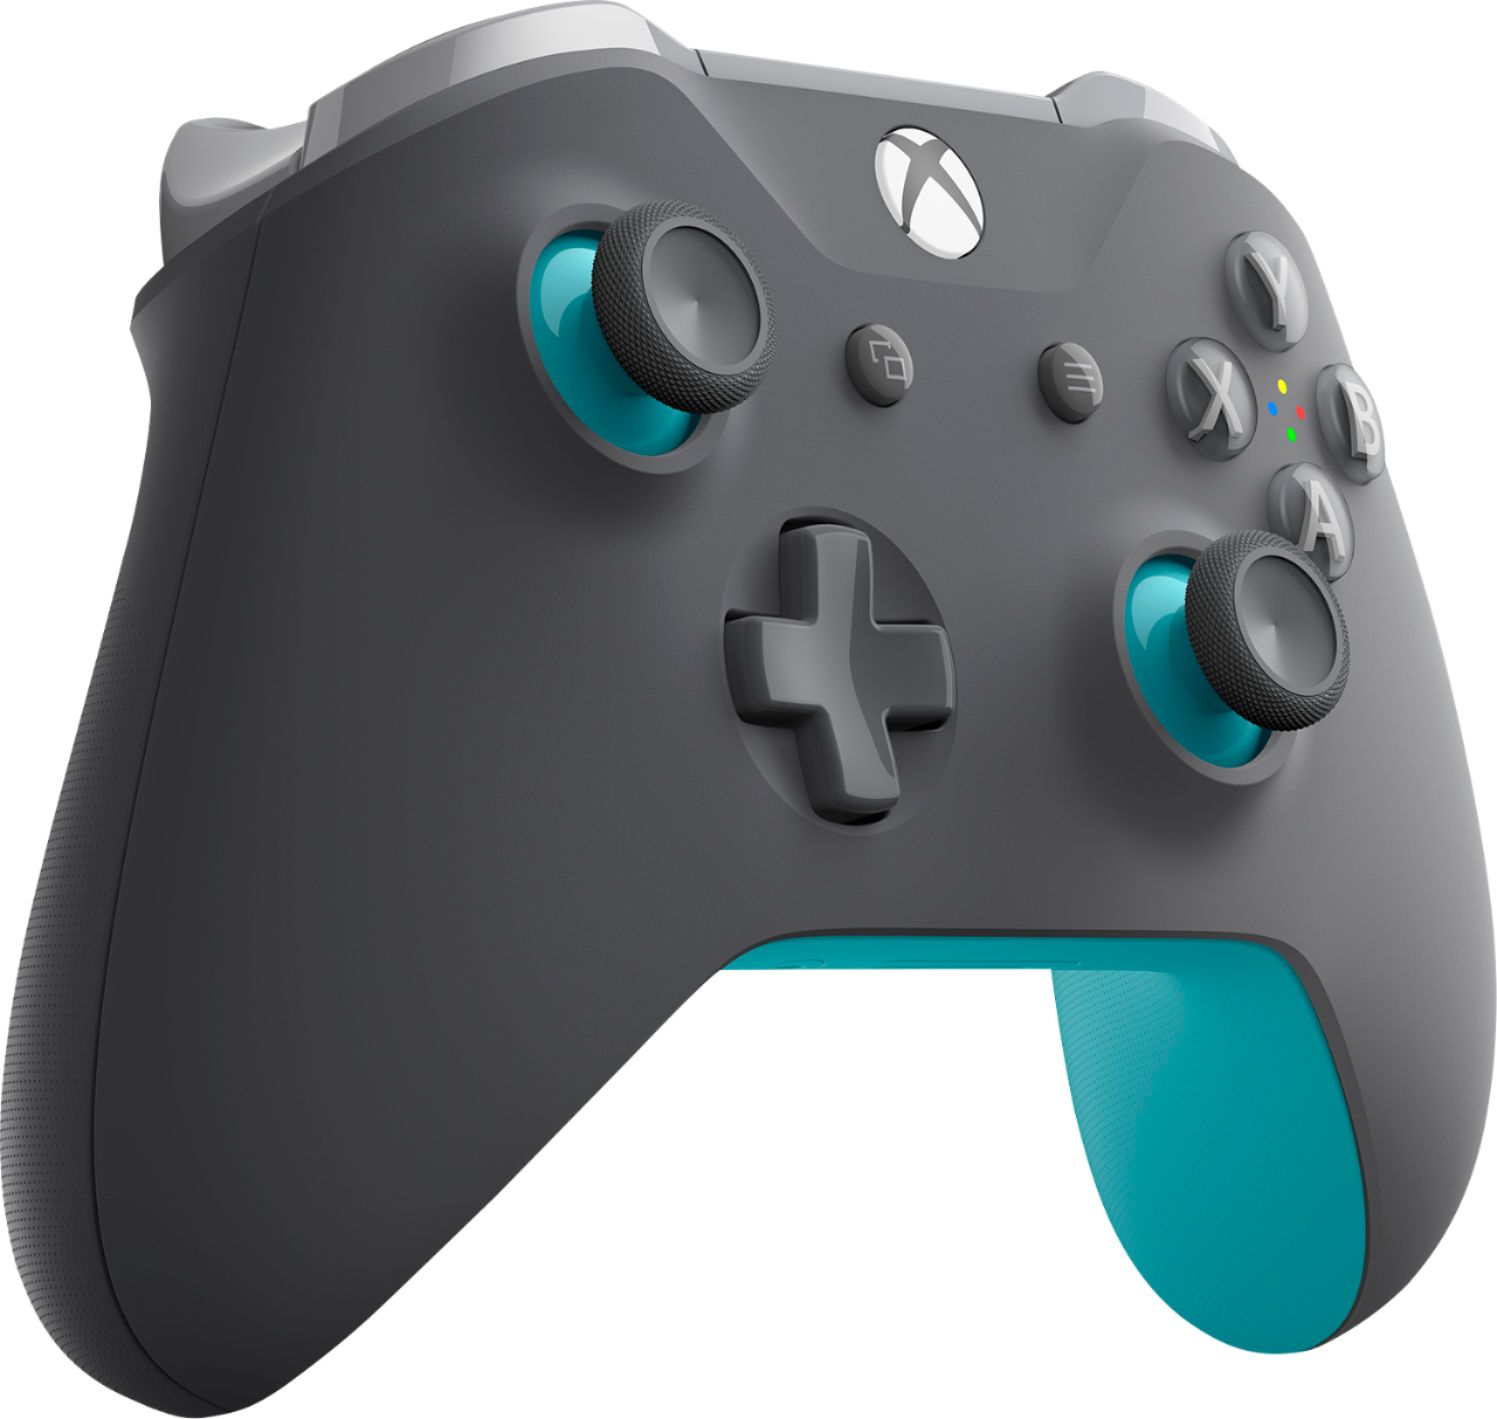 Angle View: Microsoft - Geek Squad Certified Refurbished Wireless Controller for Xbox One and Windows 10 - Gray/Blue